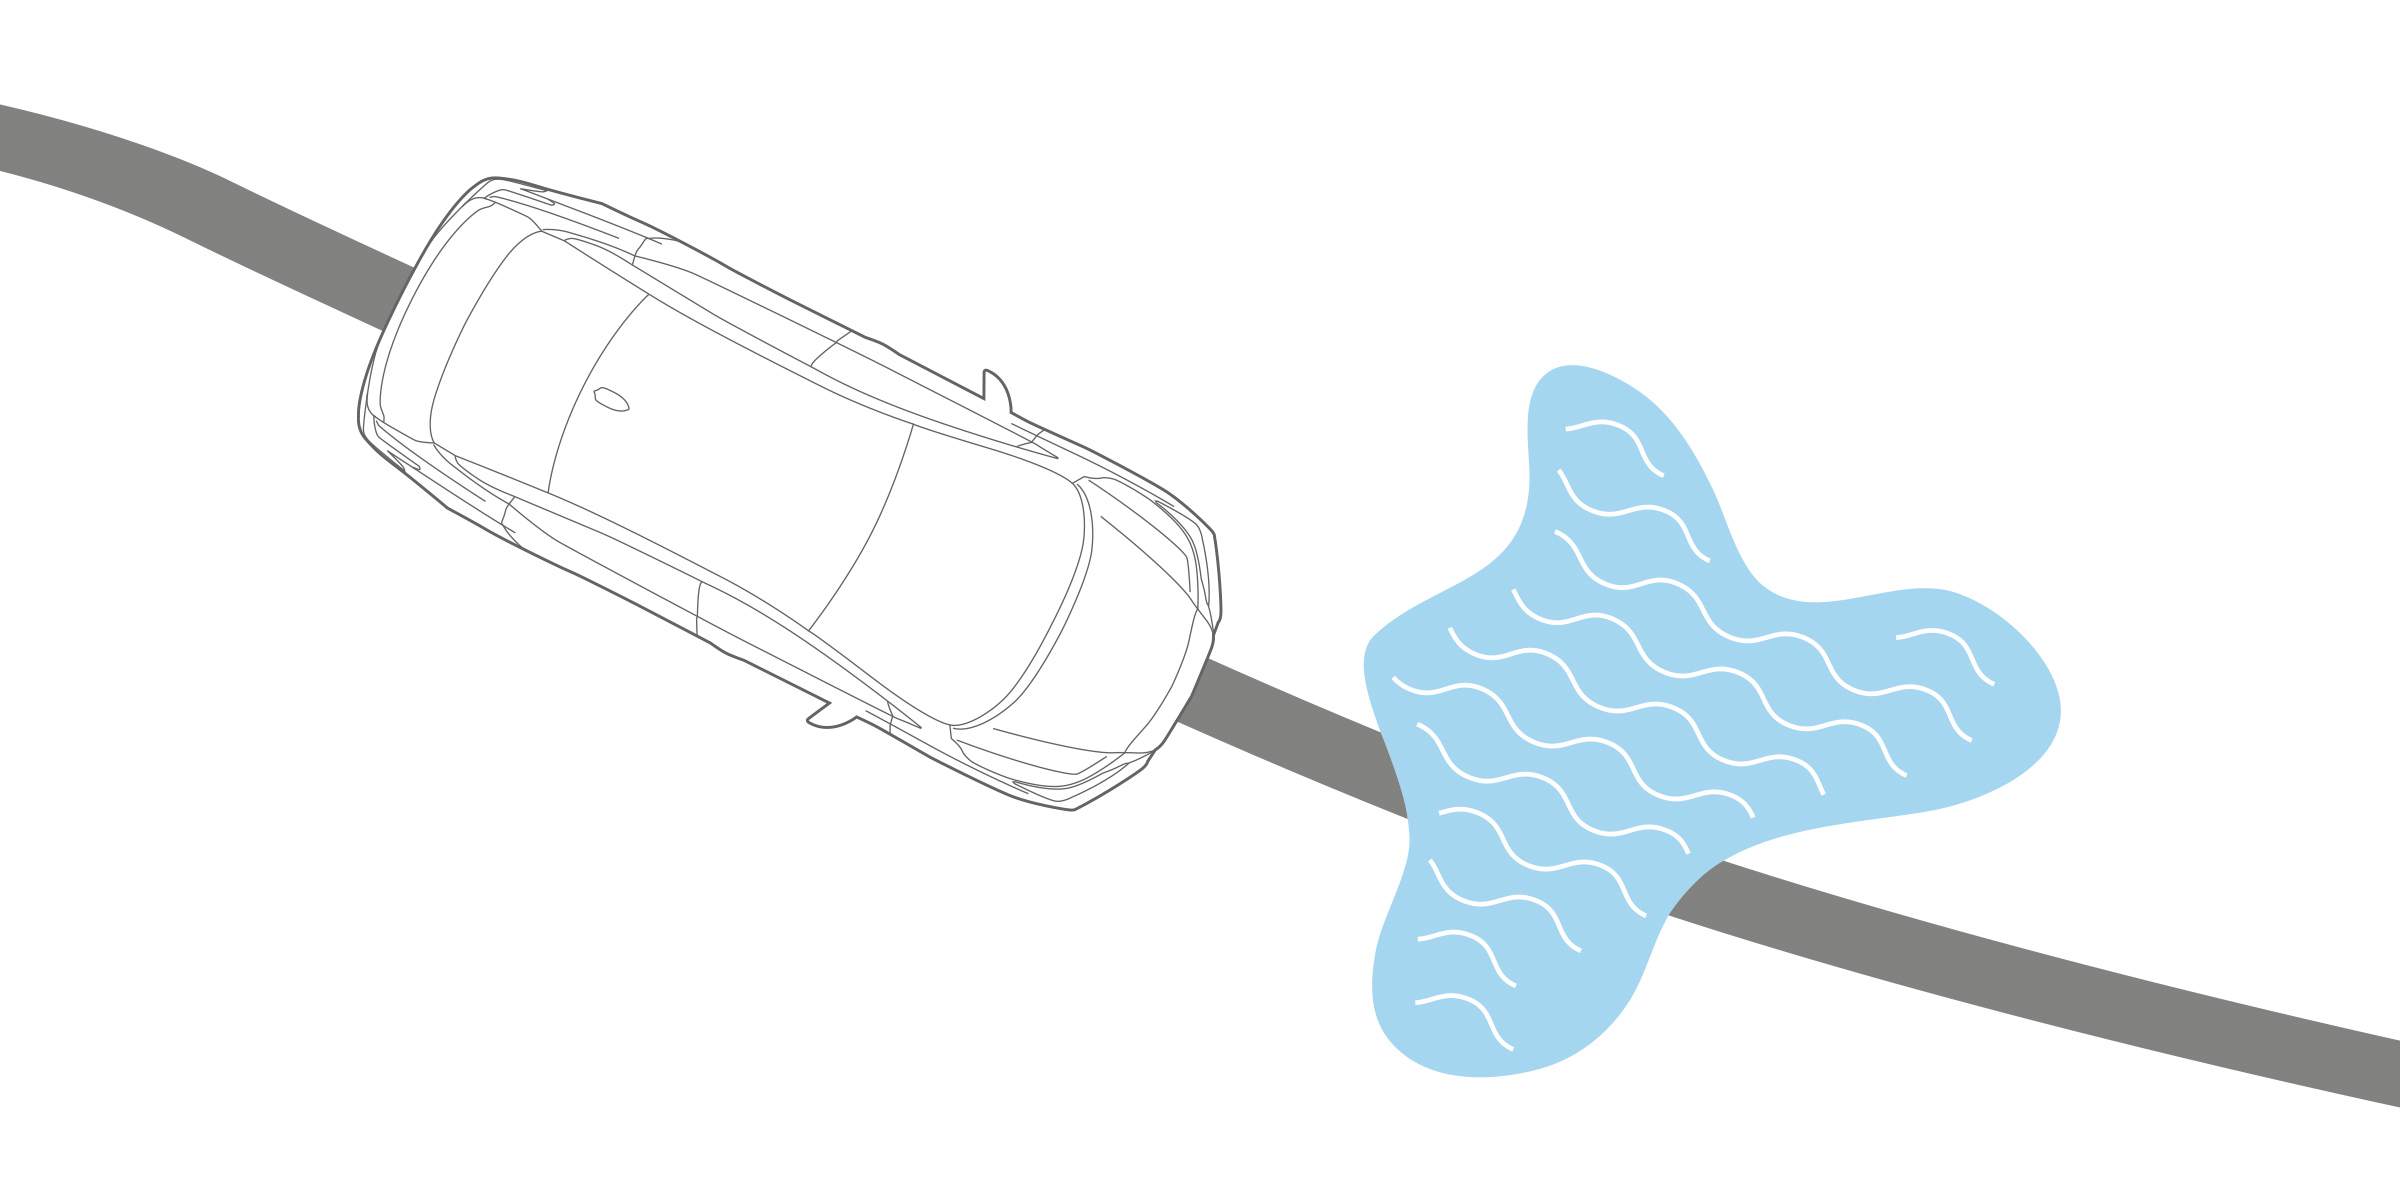 Nissan SUNNY Traction Control System illustration of vehicle approaching wet spot in road